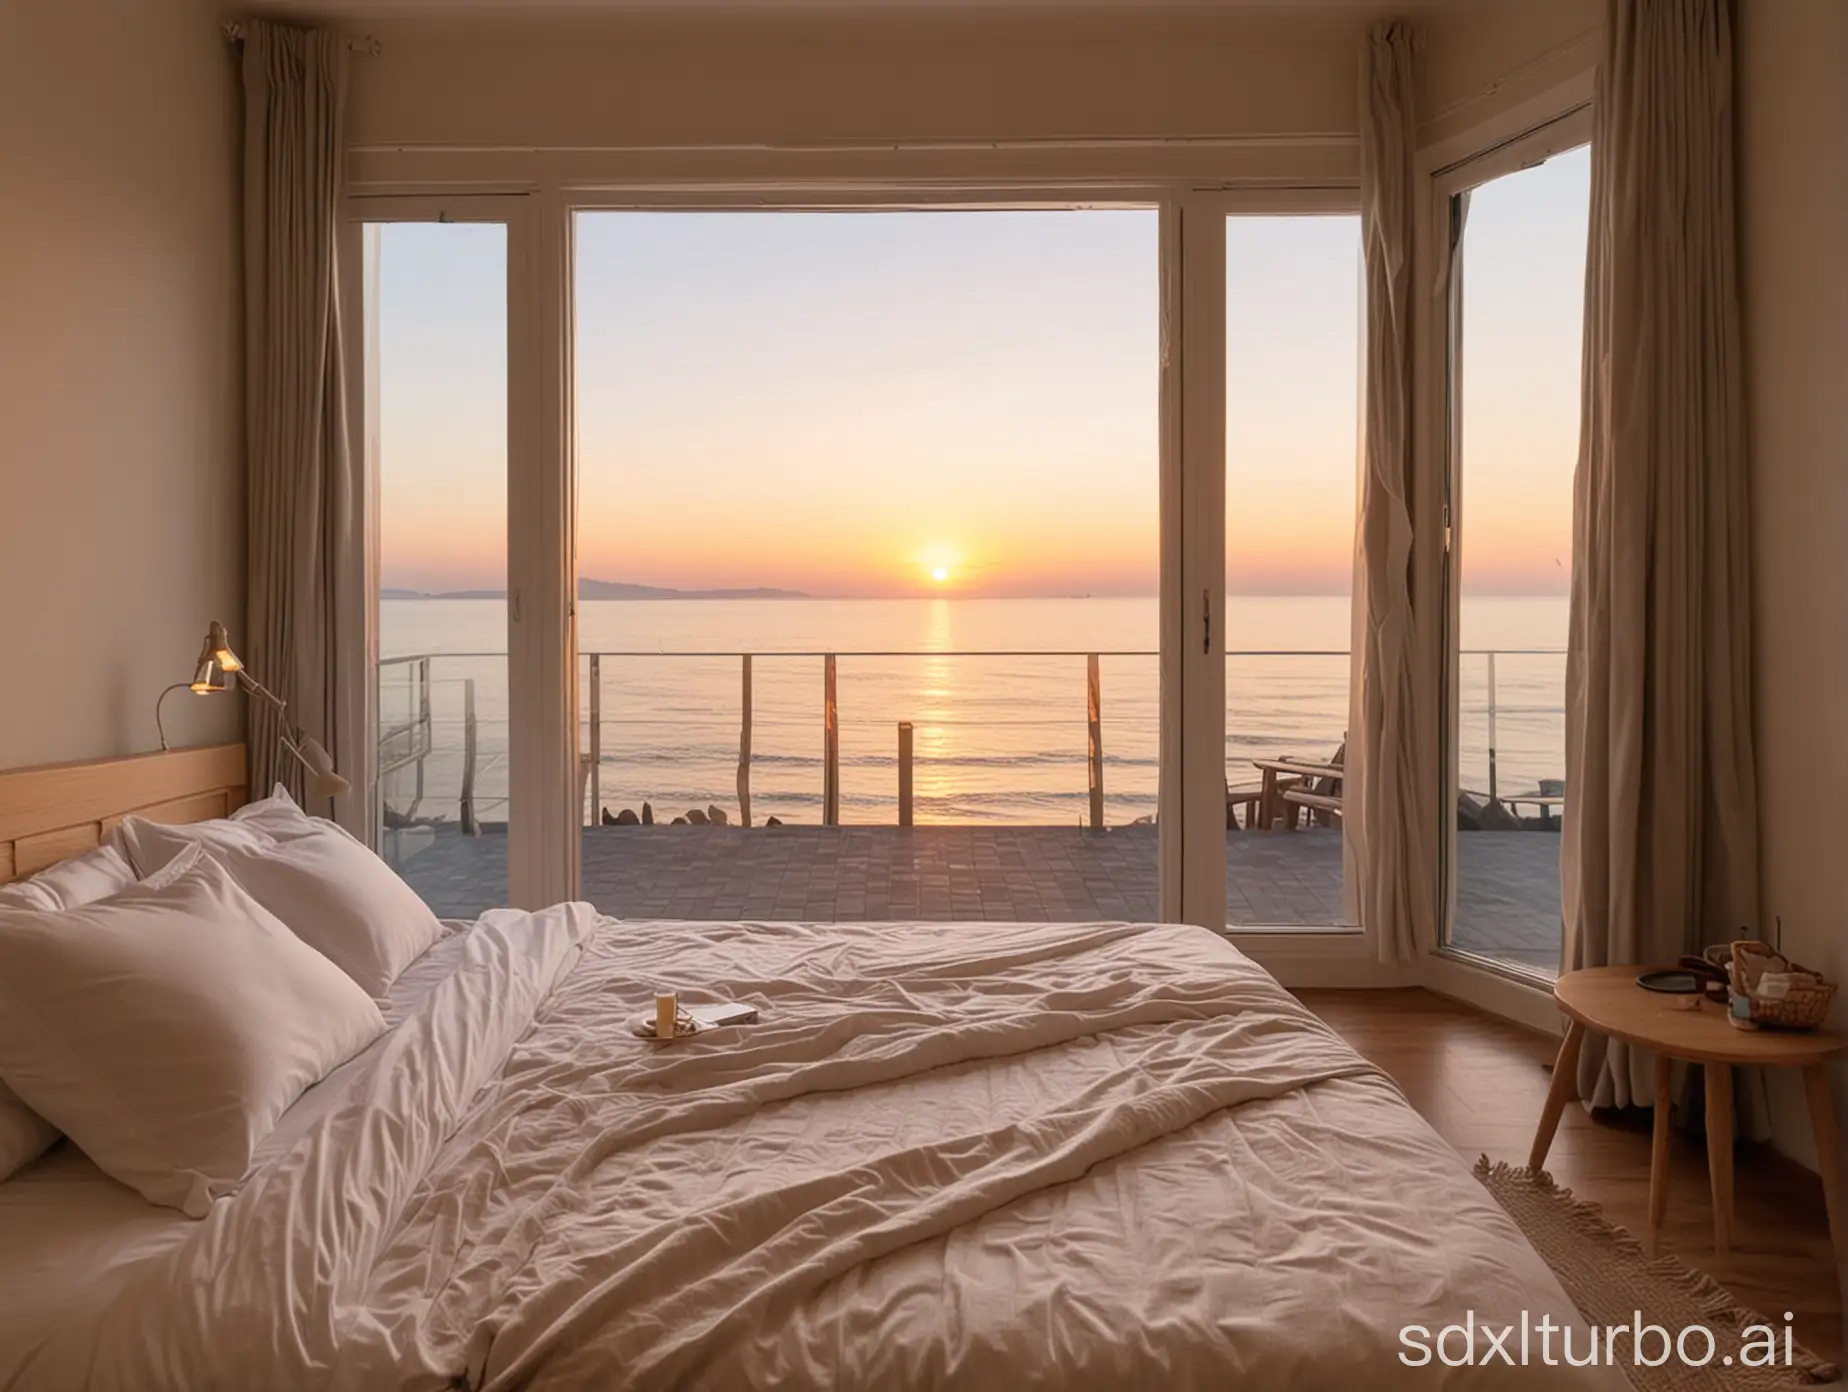 Sunrise-Seaside-View-from-Floor-to-Ceiling-Window-with-Comfortable-Bed-and-Snacks